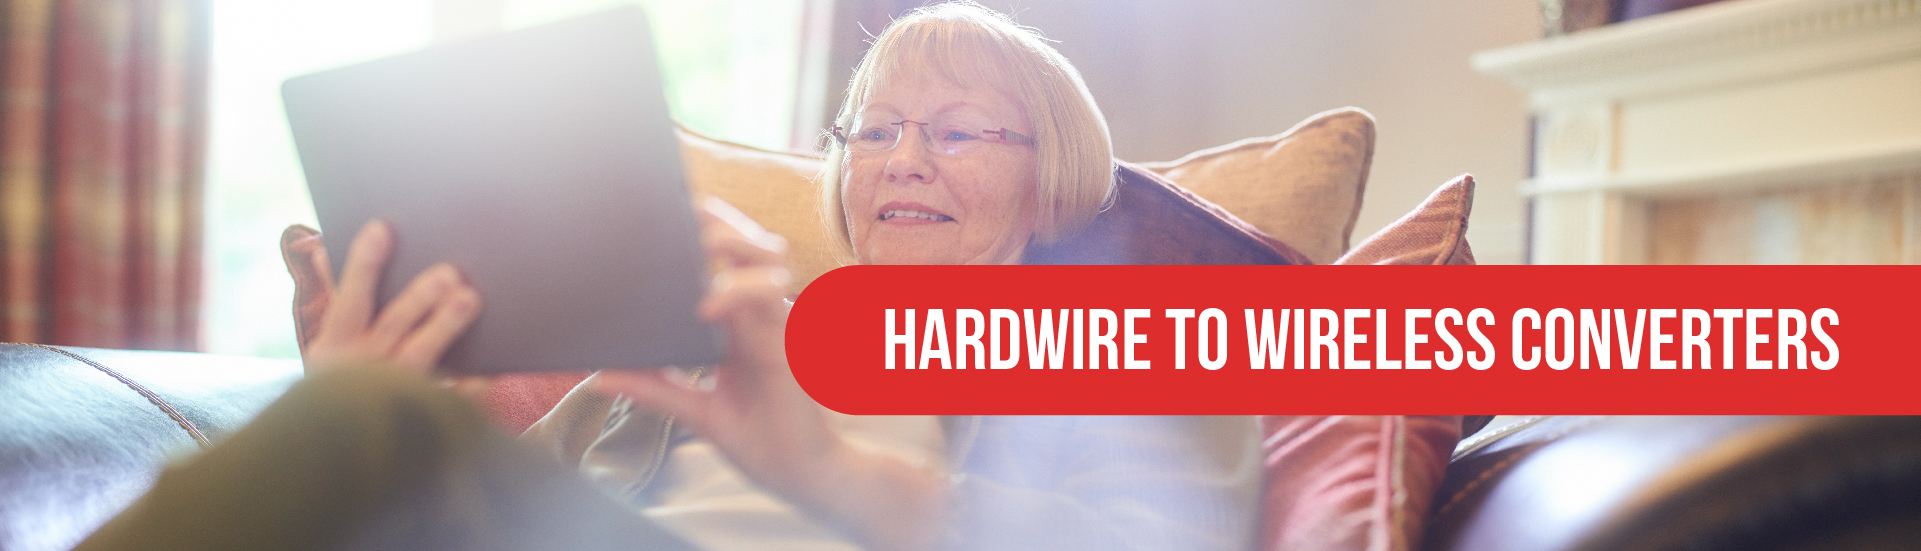 hardwire to wireless converter for alarm systems or security systems OKC